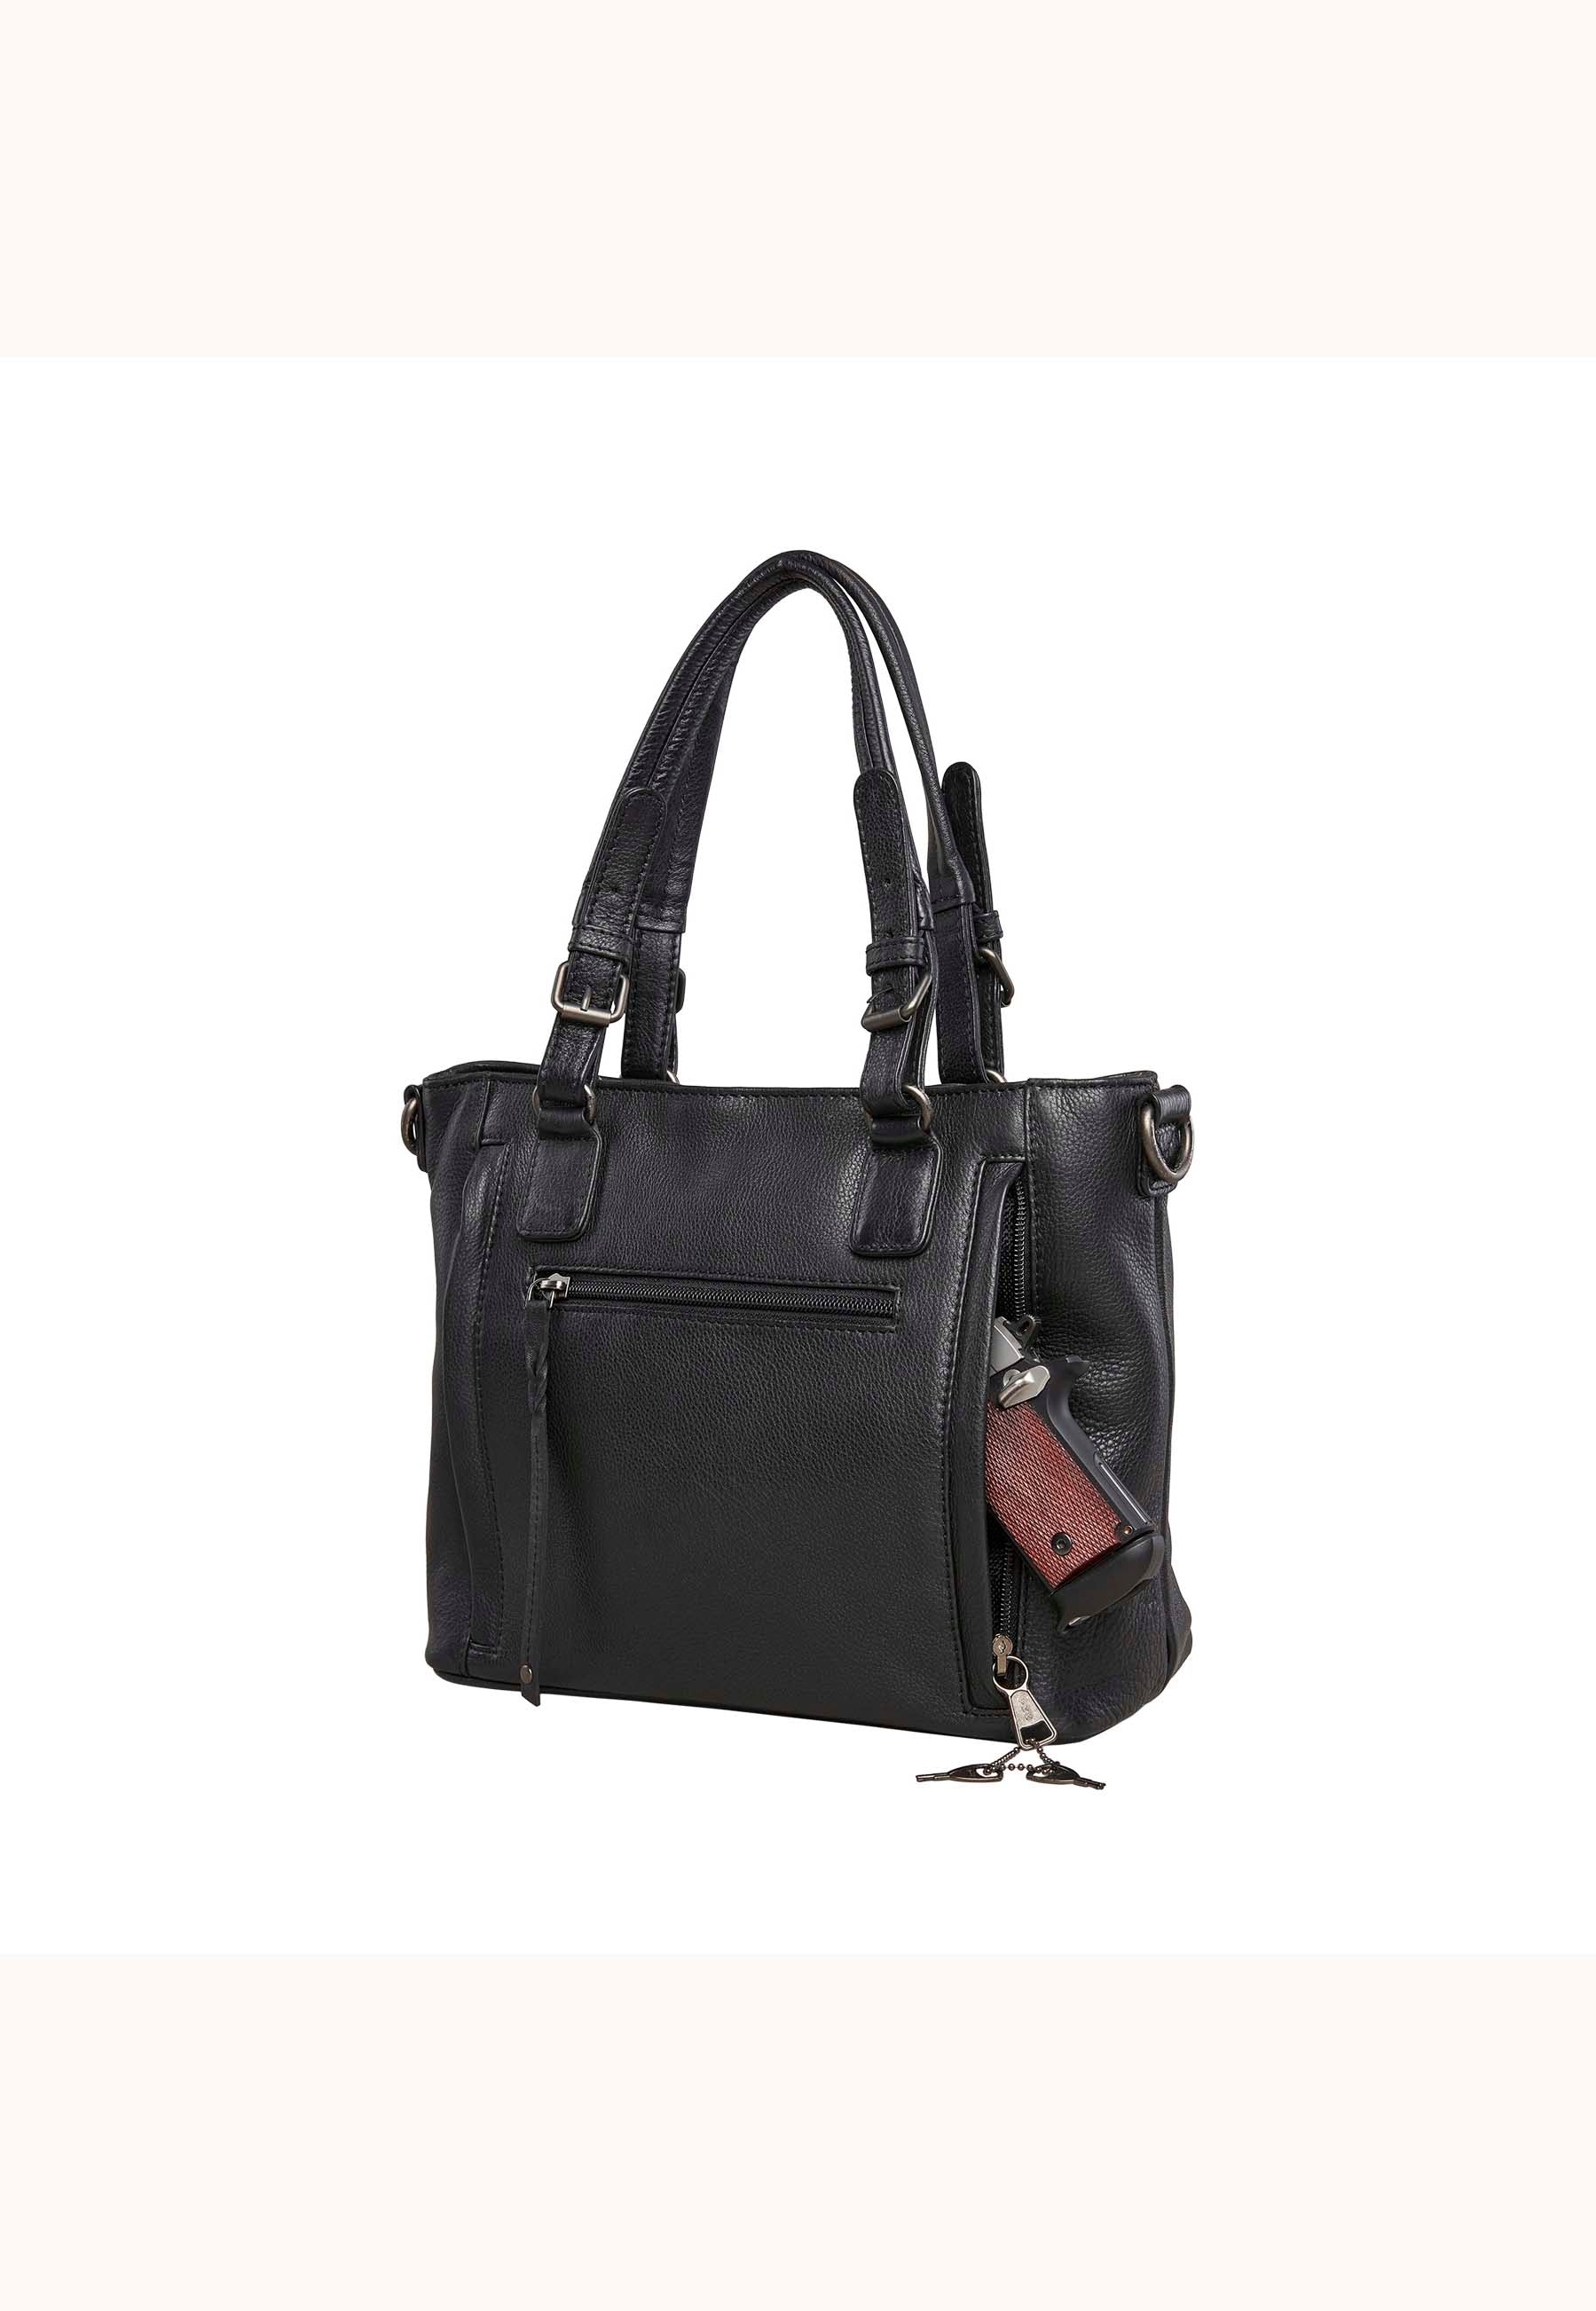 Bailey: Women's Black Leather Backpack